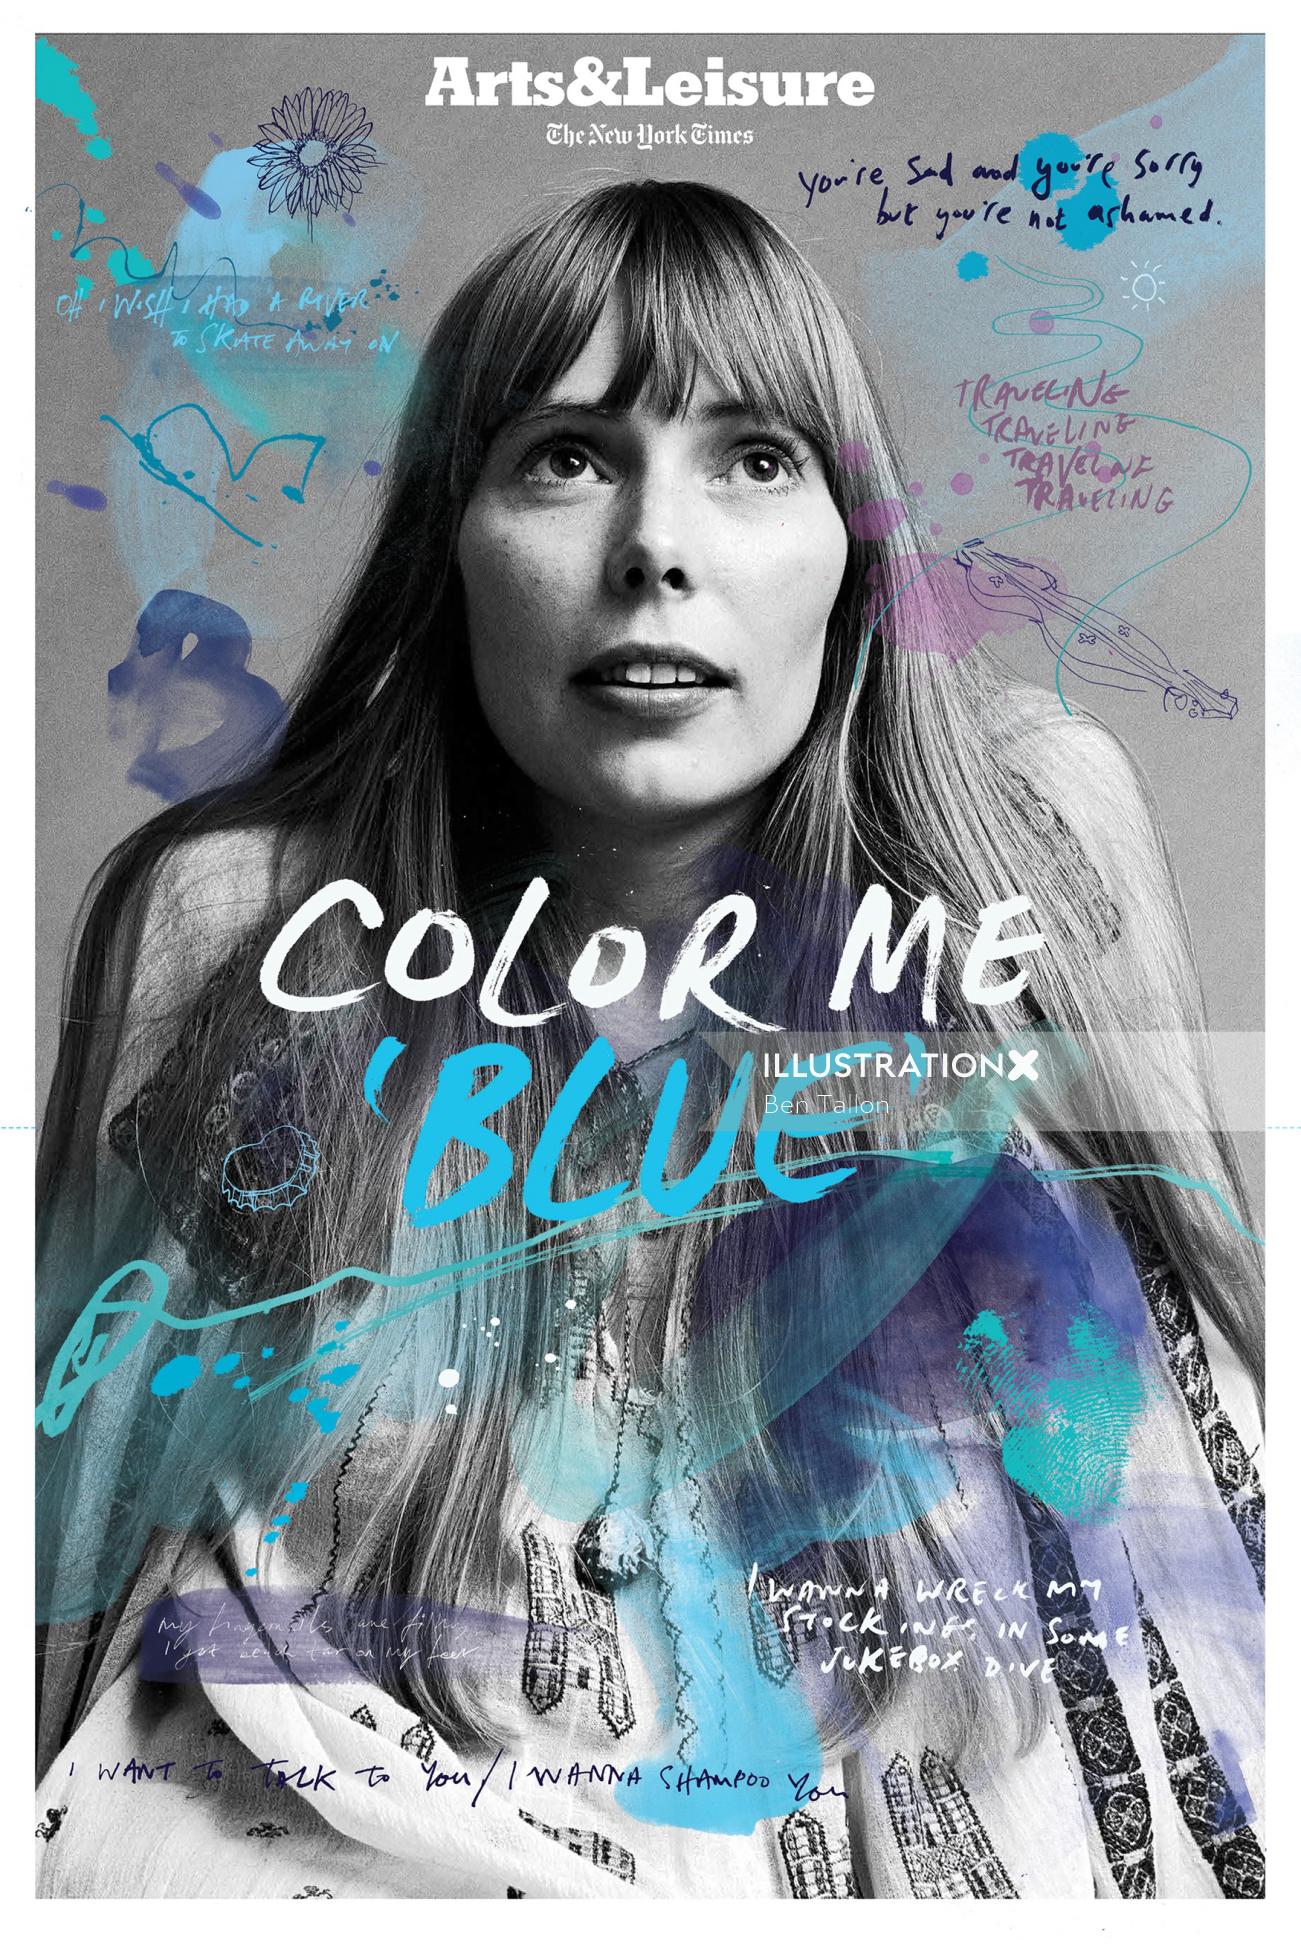 Joni Mitchell's 'Blue' 50th anniversary New York Times Arts & Leisure cover